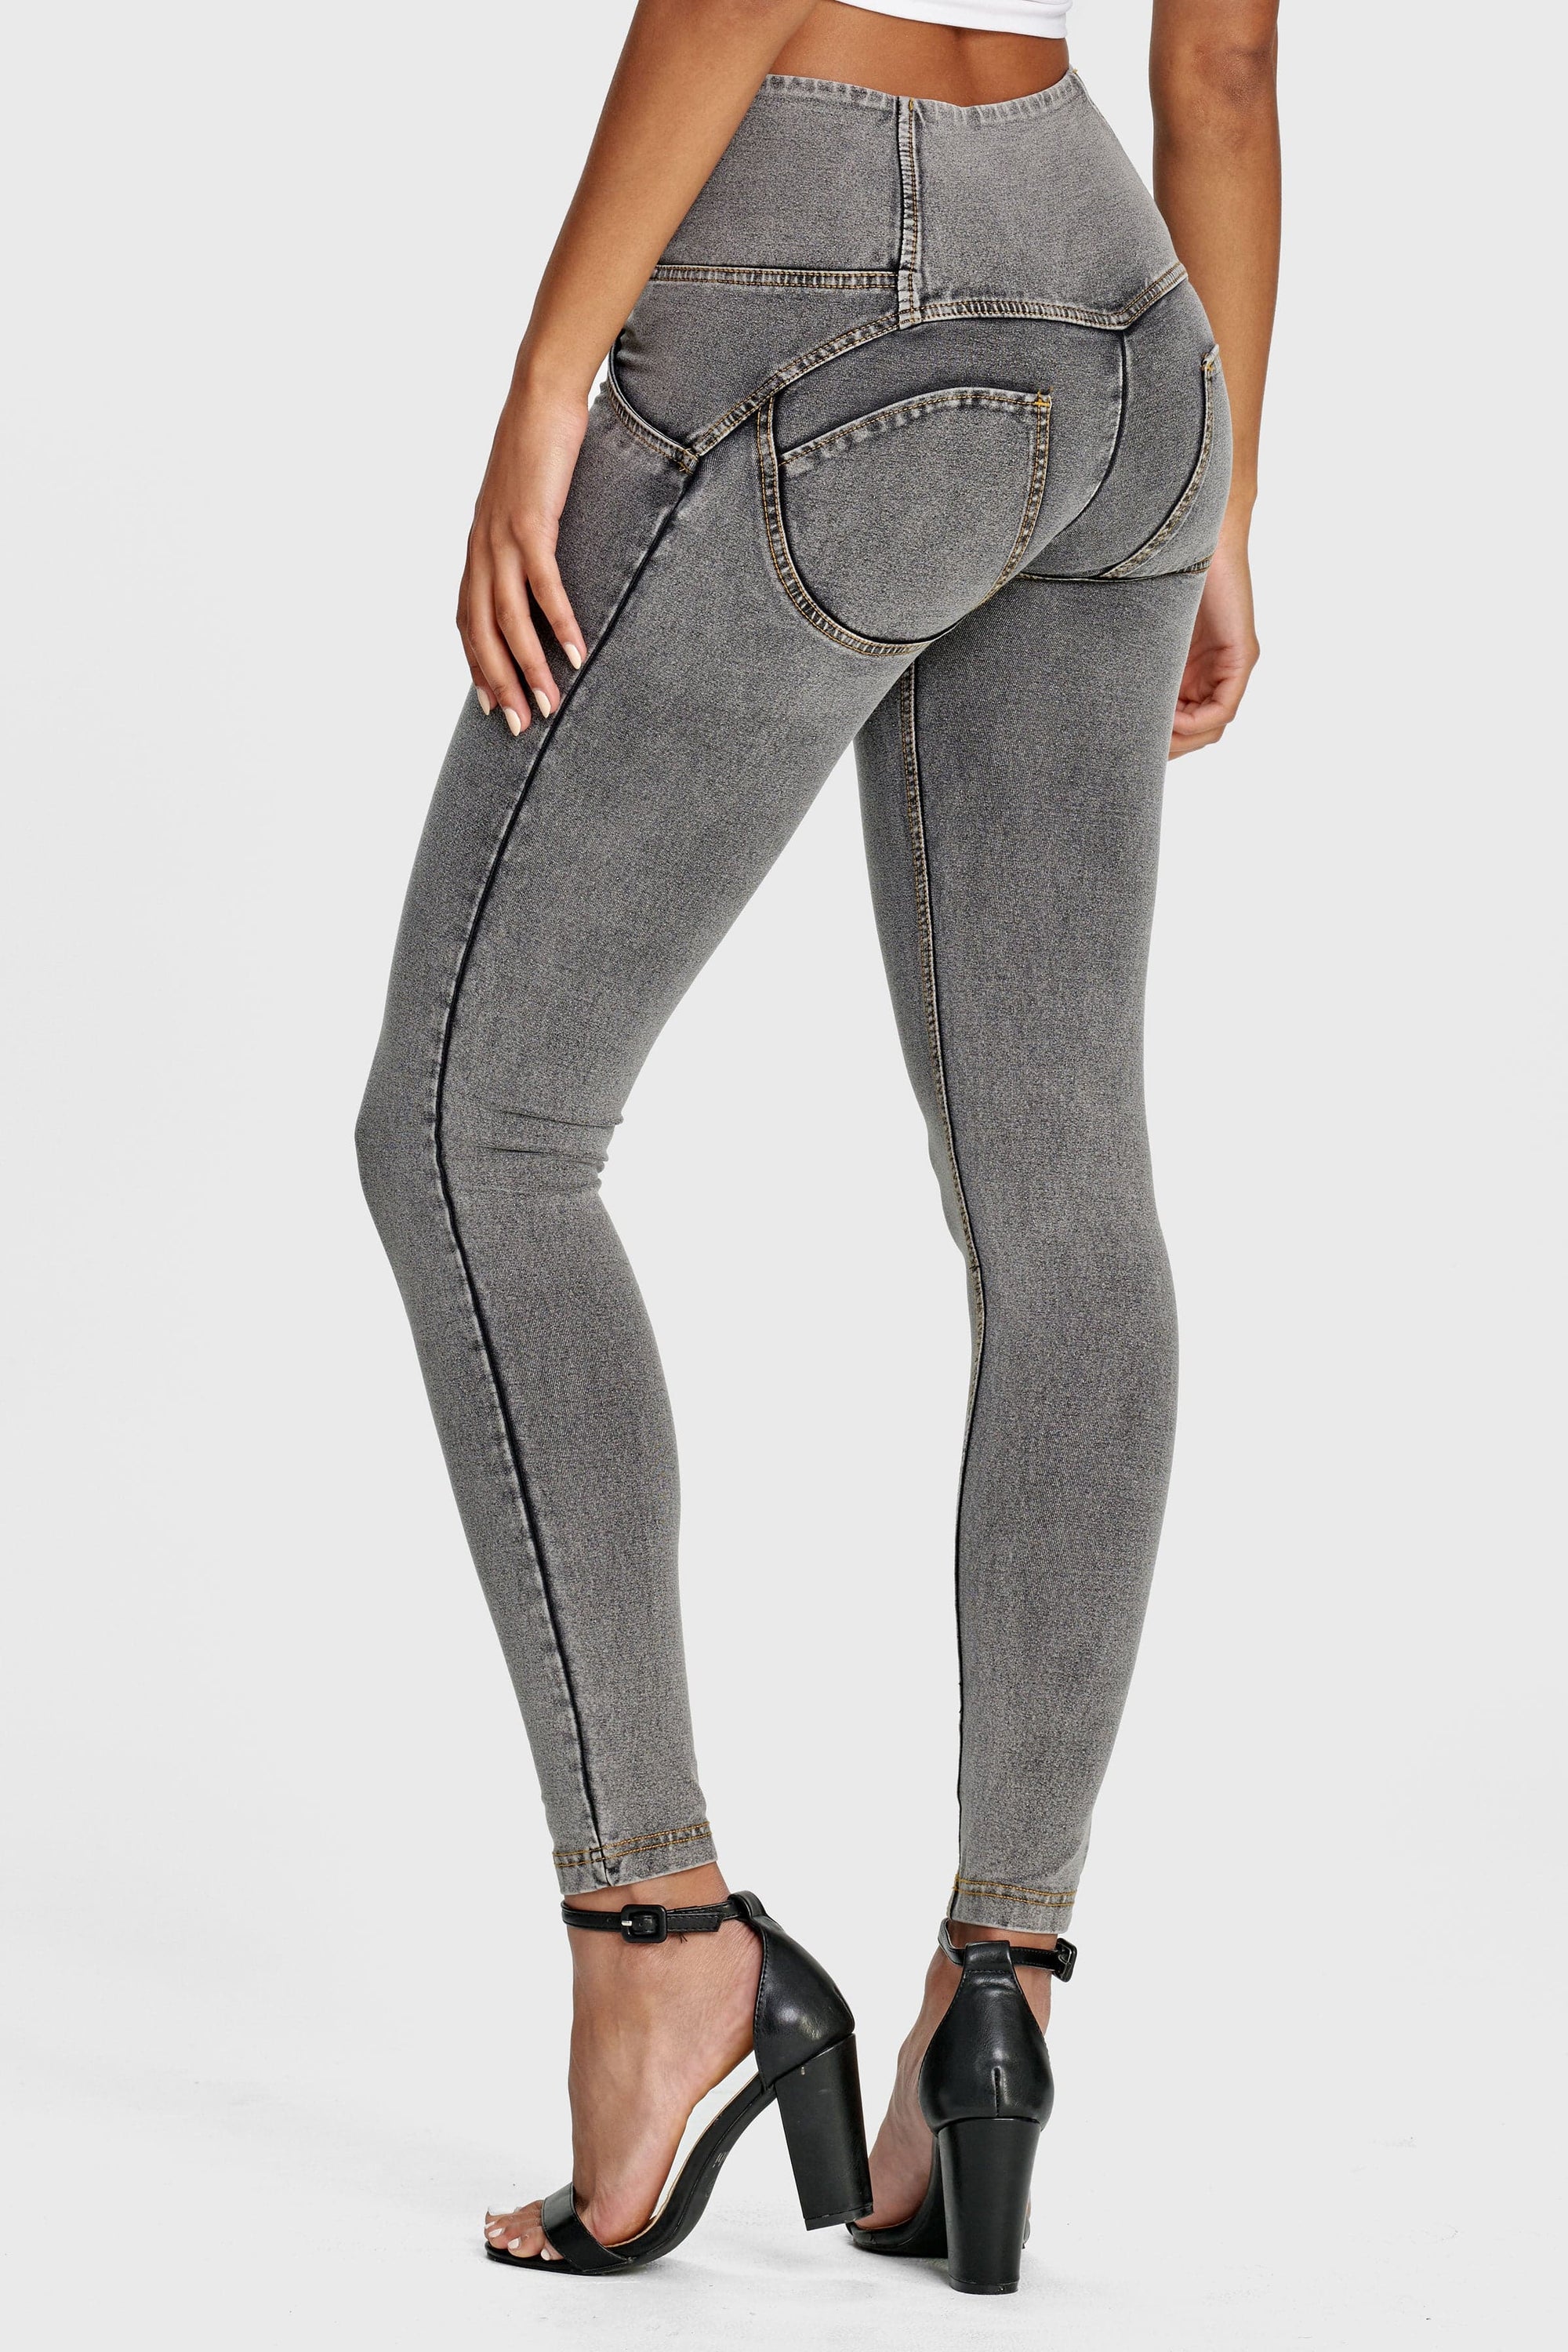 WR.UP® Denim - 3 Button High Waisted - Full Length  - Grey + Yellow Stitching 6